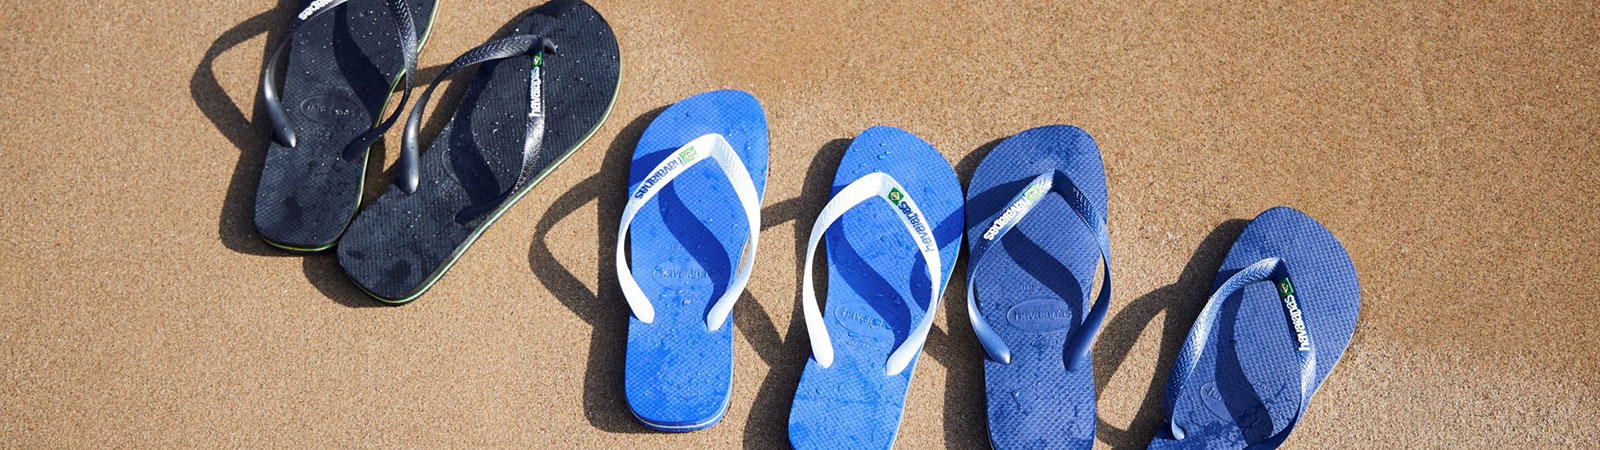 chaussure havaianas; tong femme; tong homme, chaussure nu pied havaianas